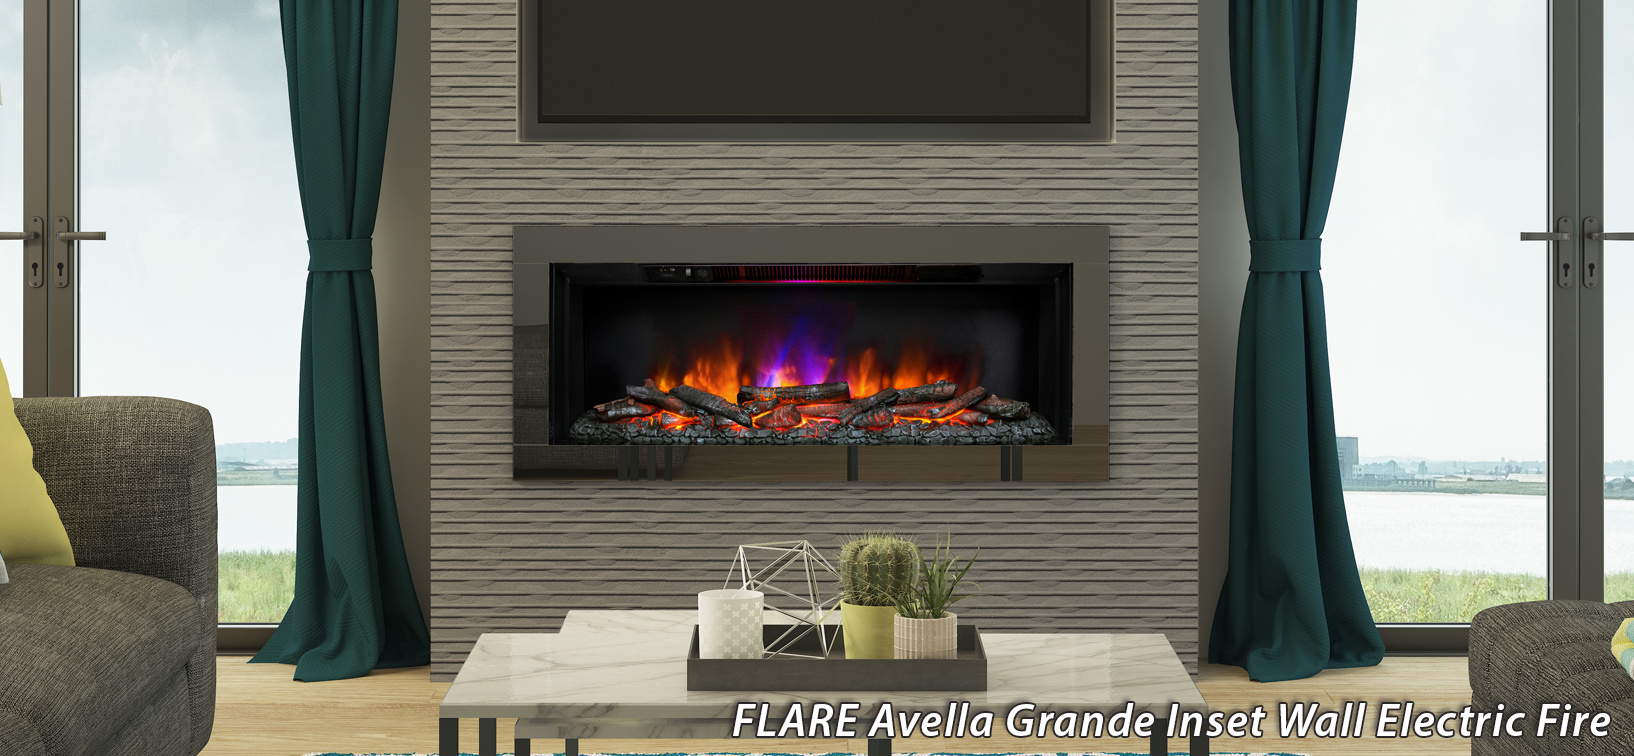 FLARE Avella Grande Inset Electric Wall Fire